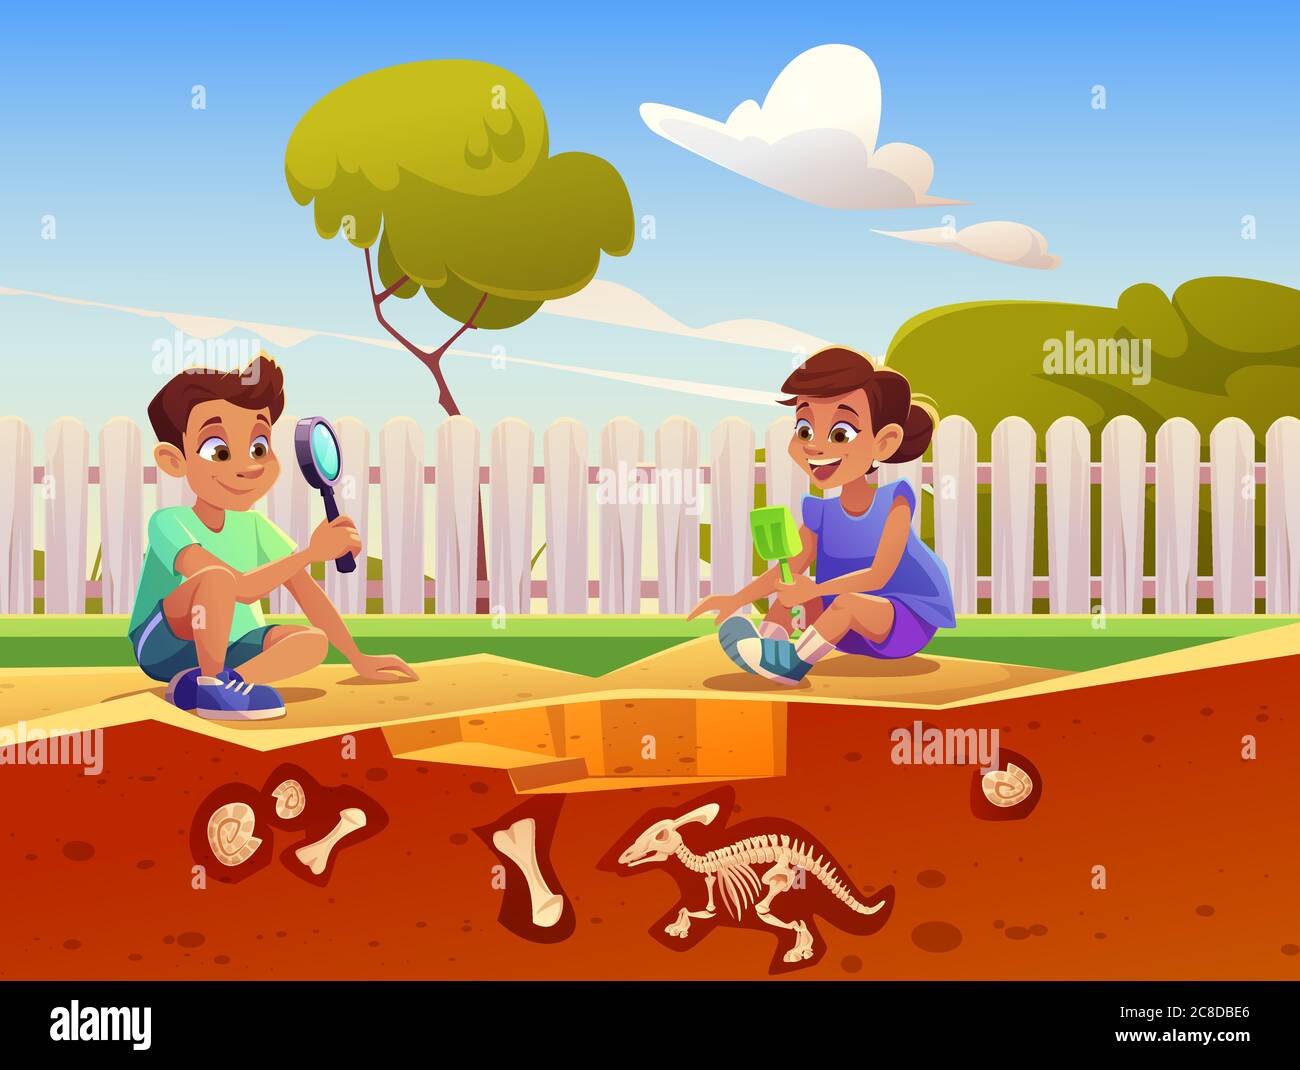 Boy and girl playing in game about excavation fossil dinosaurs in sandbox. Vector cartoon illustration with kids discover buried skeletons and shells in sand on backyard Stock Vector